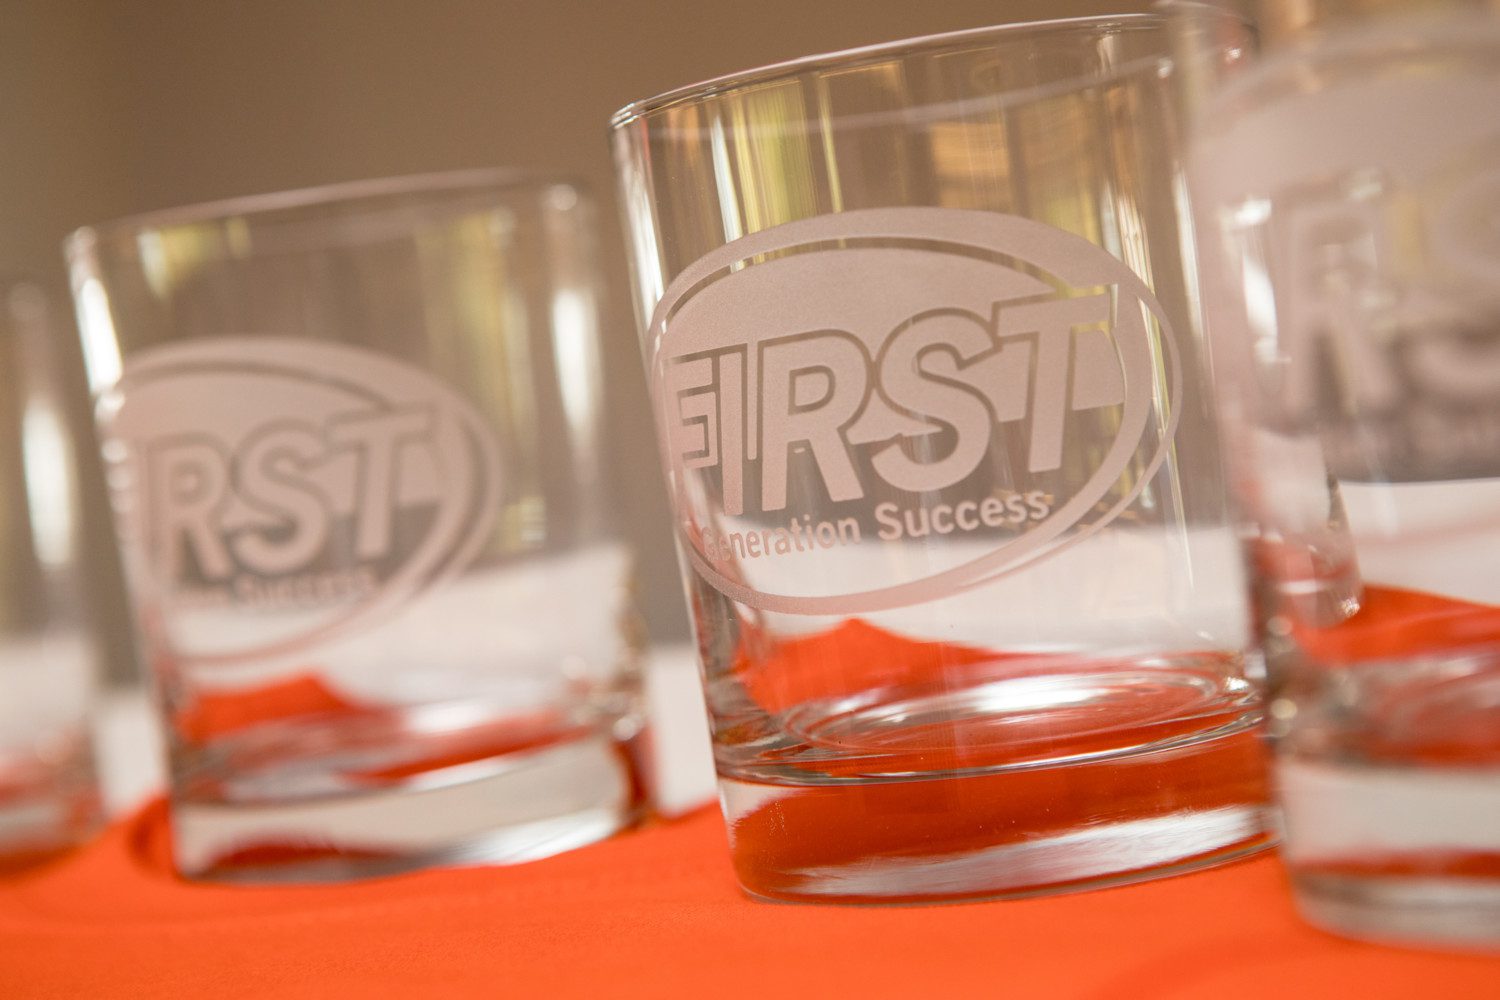 Glasses with the First-Generation Student Success logo